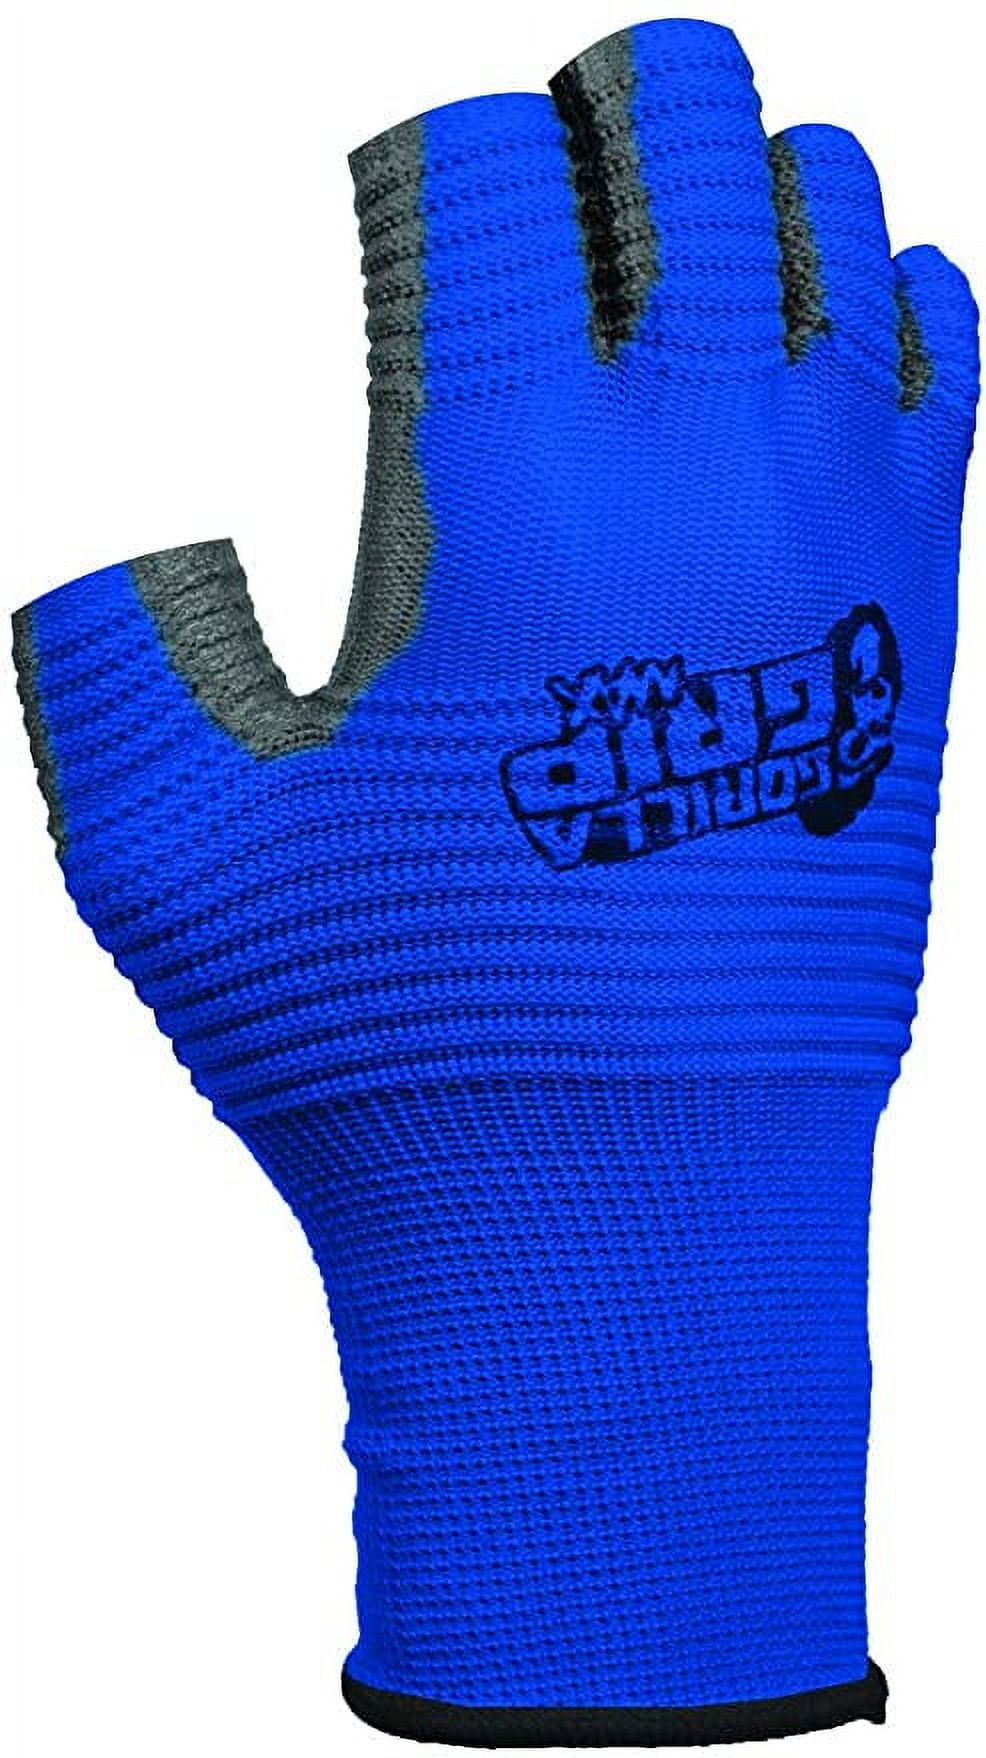 Gorilla Grip Gloves, Now Available in Walmart and Academy Sports